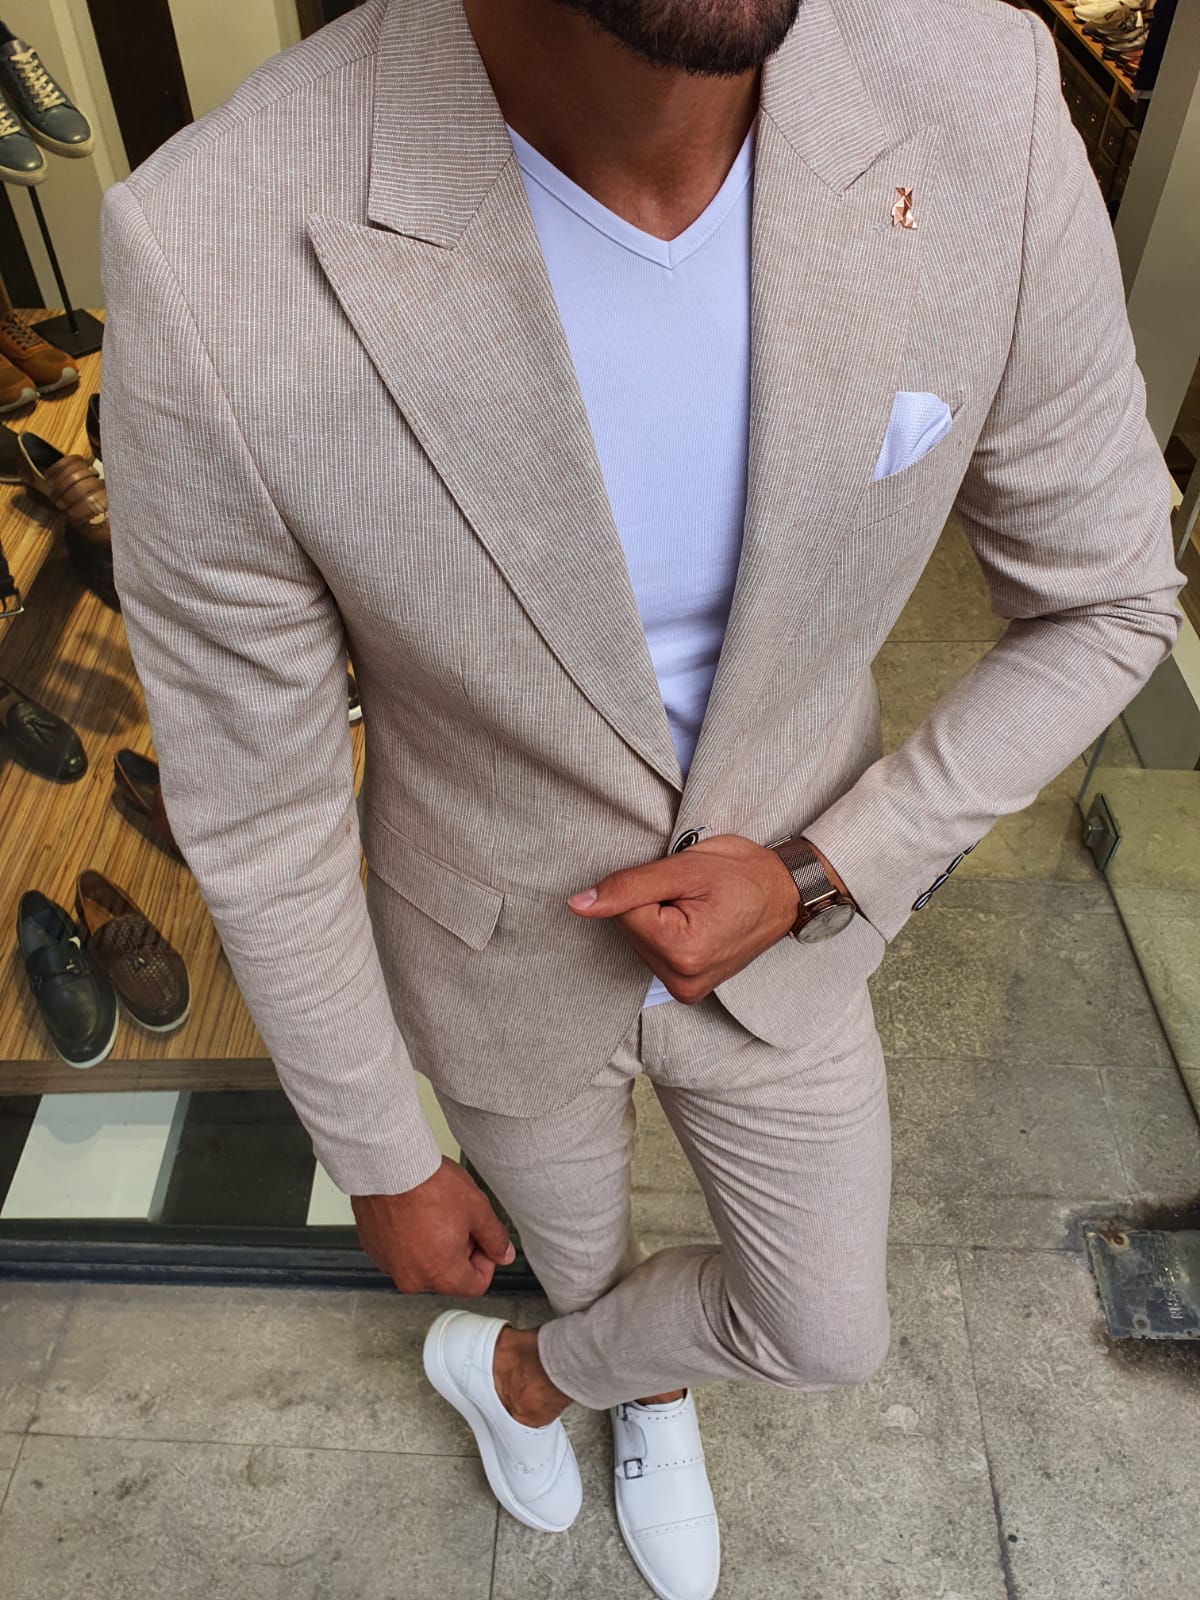 A Suit Without A Tie Will Earn You the Sharpest Casual Look by GentWith Blog